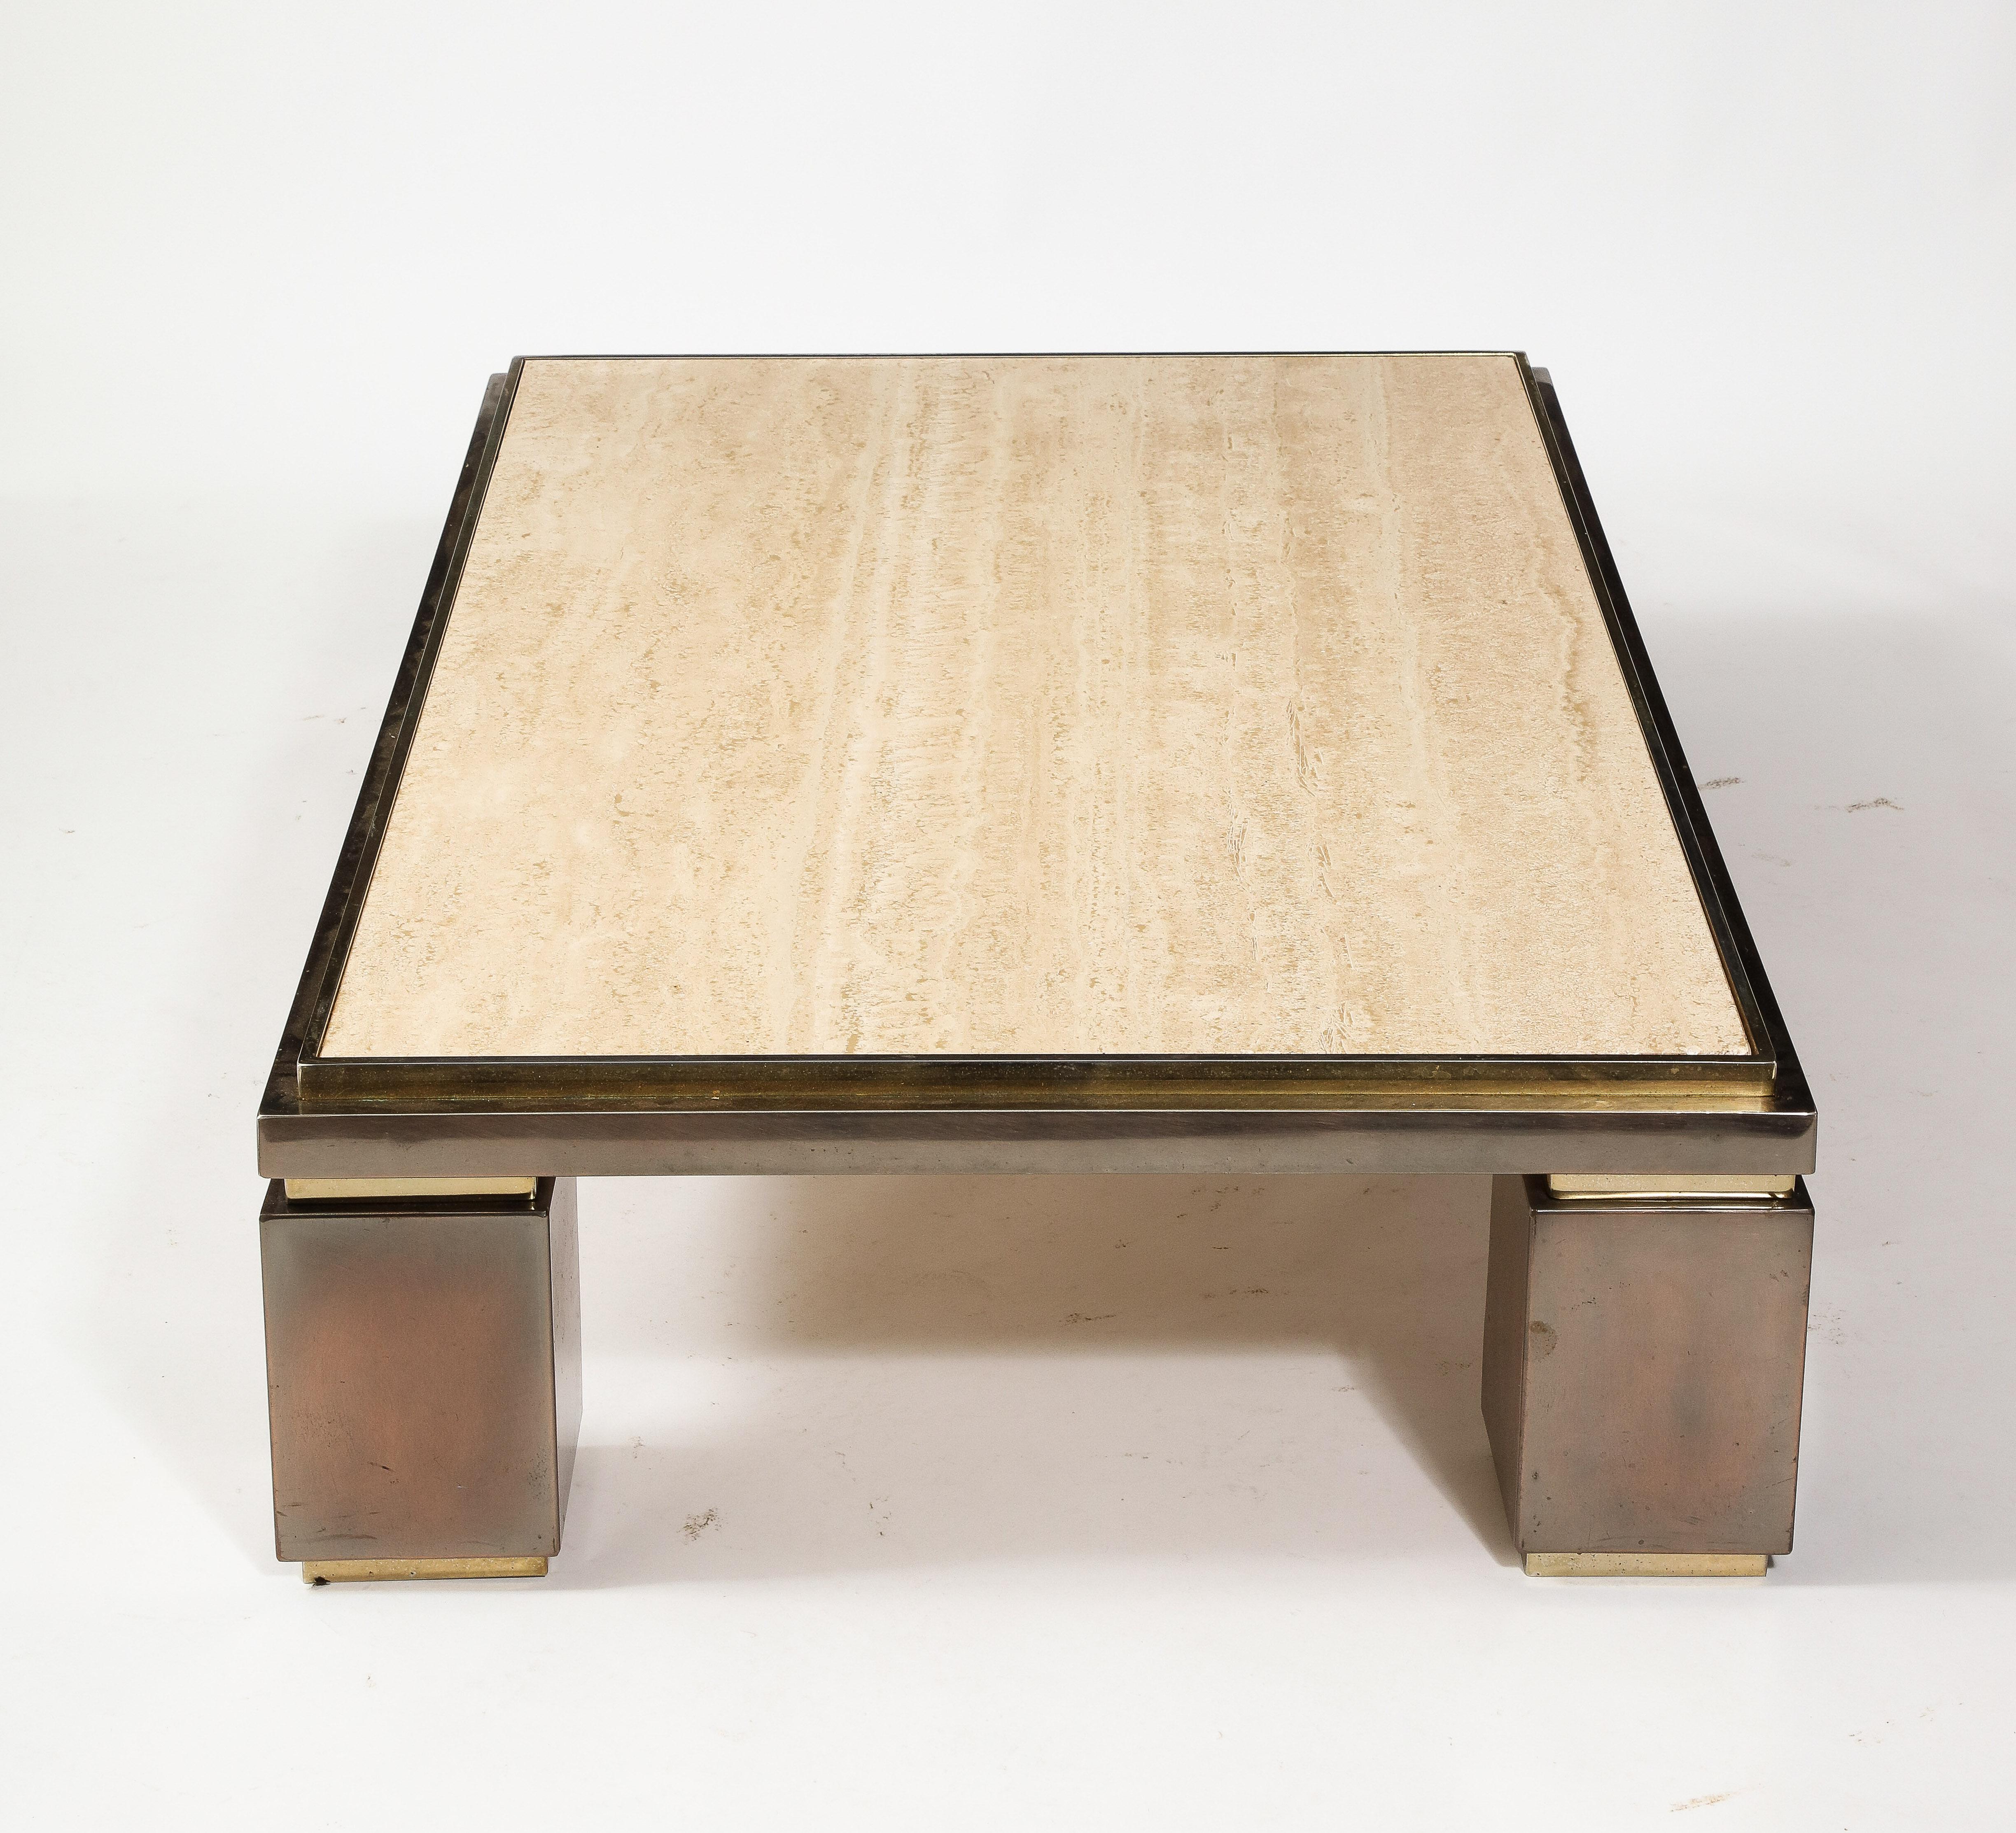 Large Deco Style BelgoChrom Travertine & Brass Coffee Table, Belgium 1960's For Sale 10